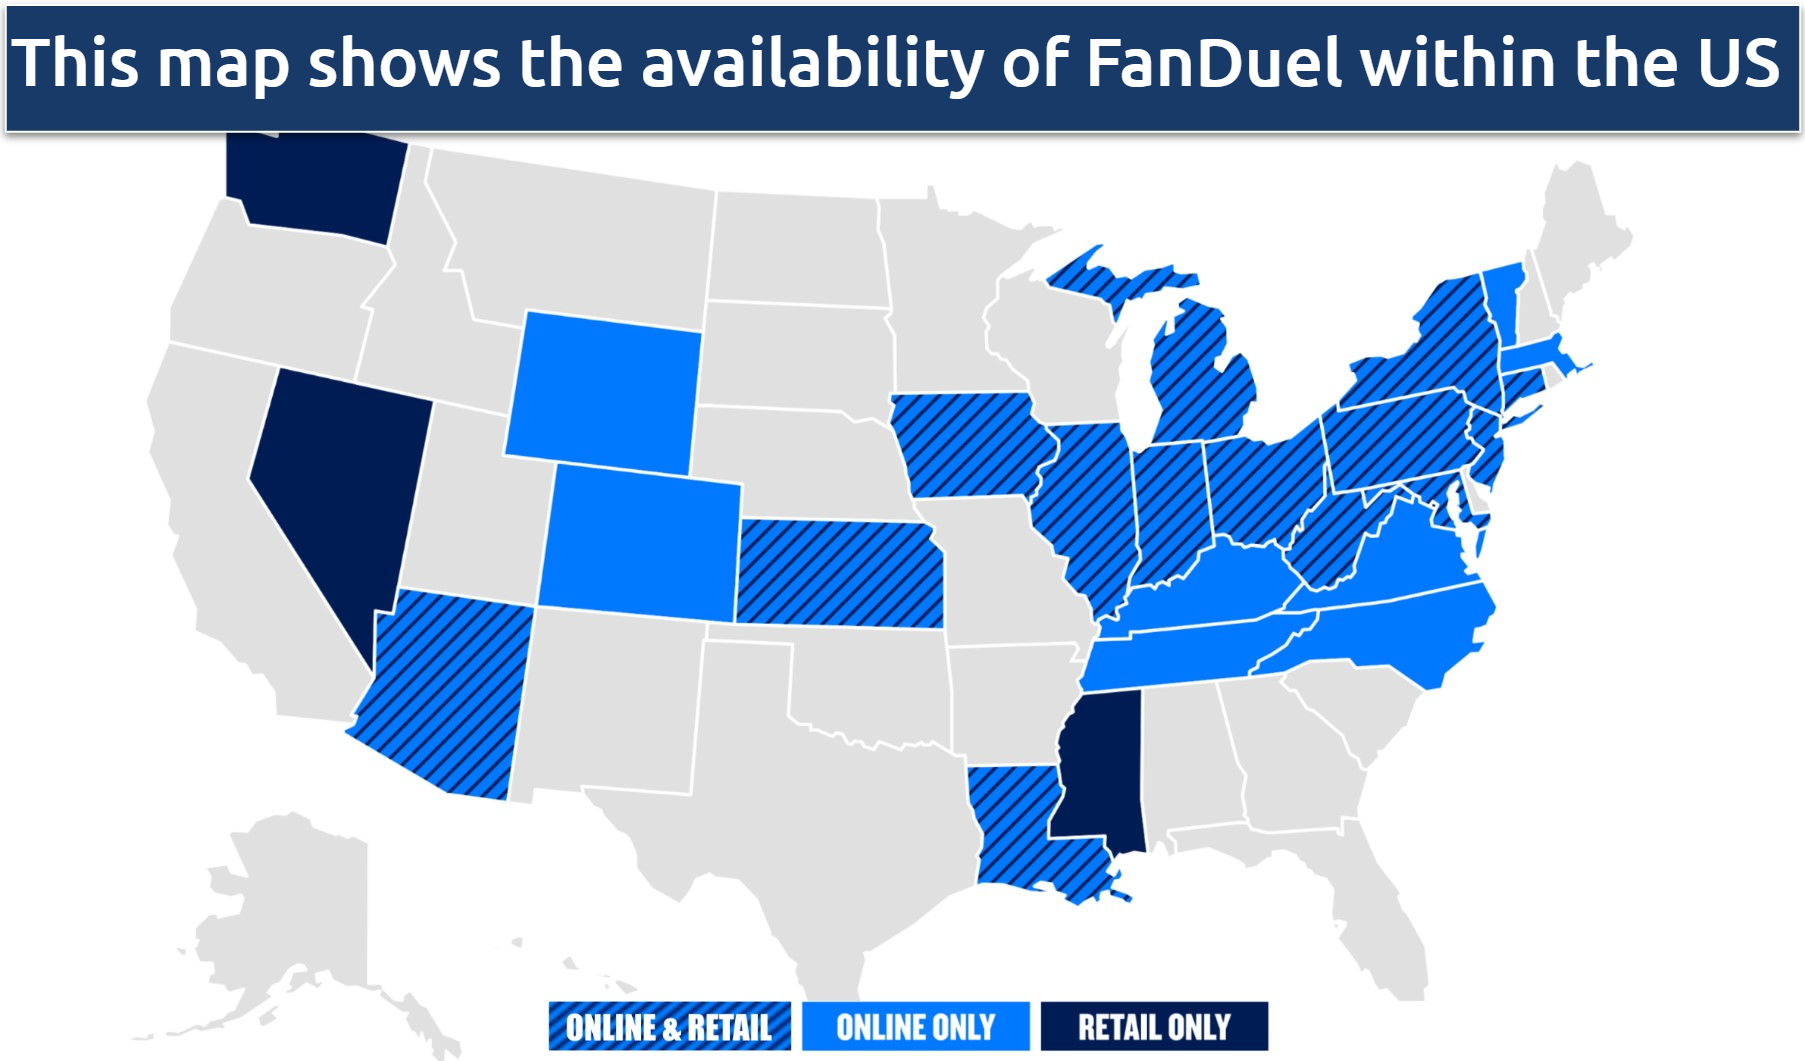 Map showing the state-by-state availability of FanDuel in the US